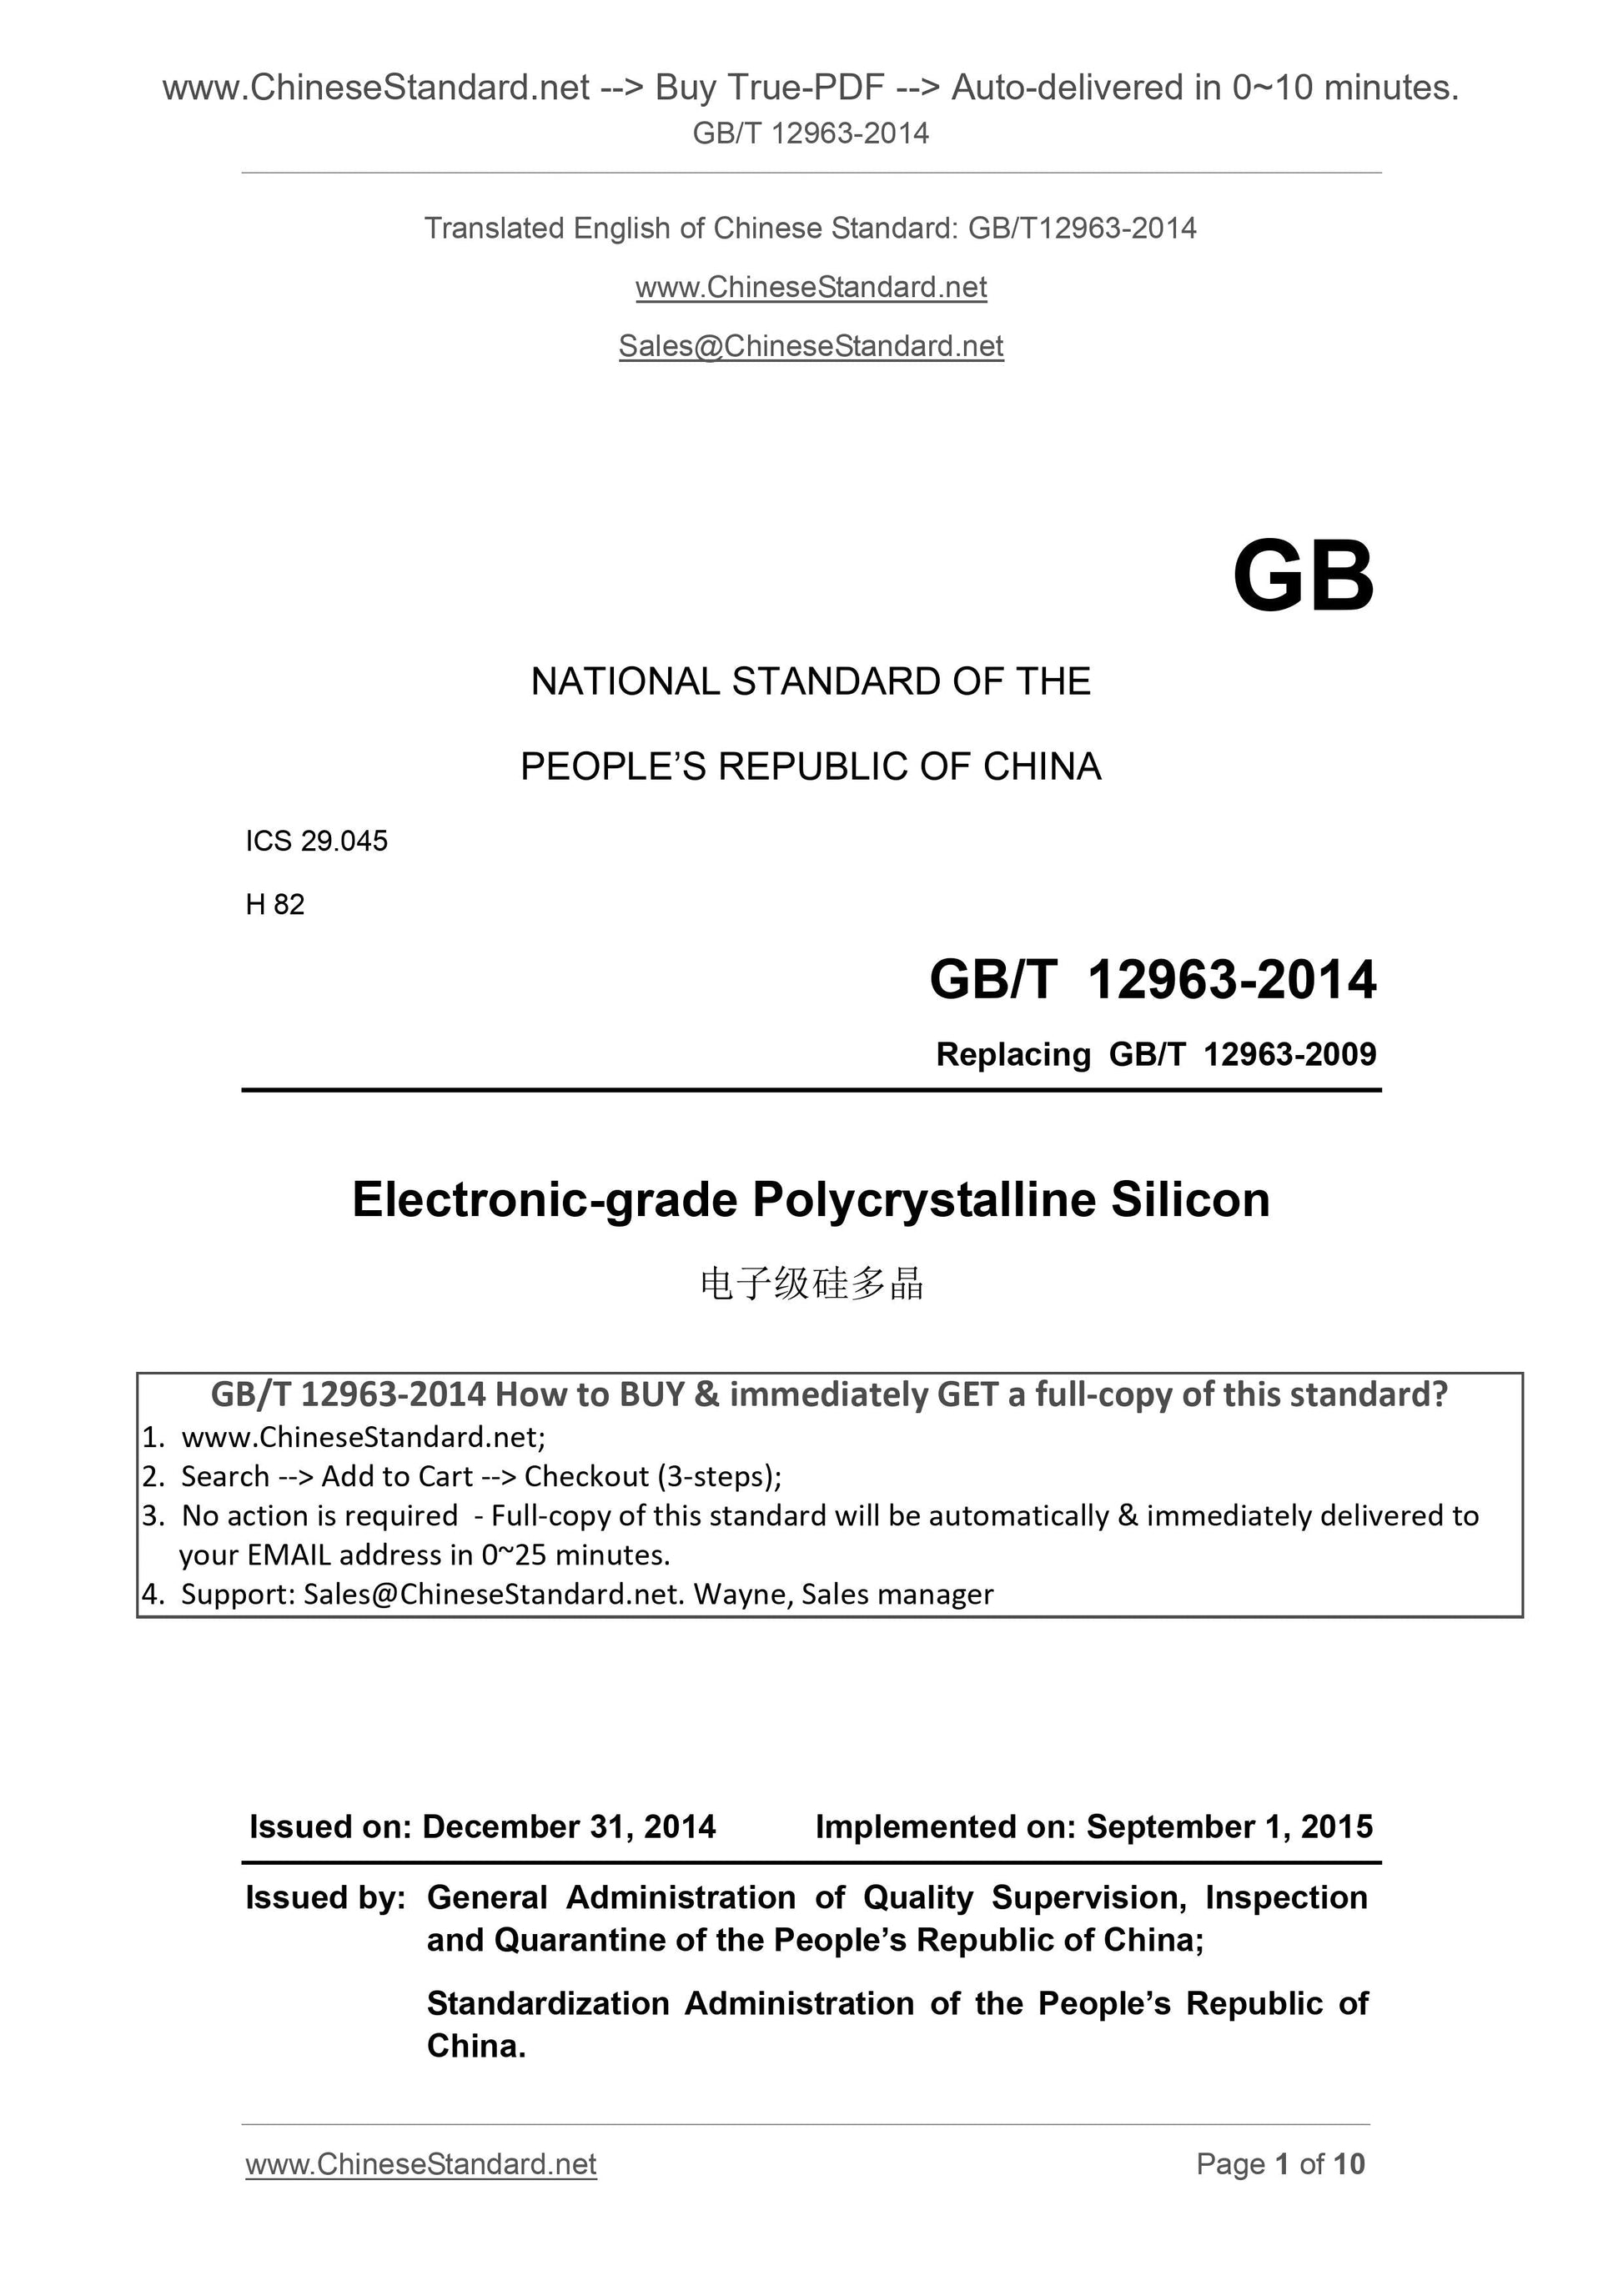 GB/T 12963-2014 Page 1